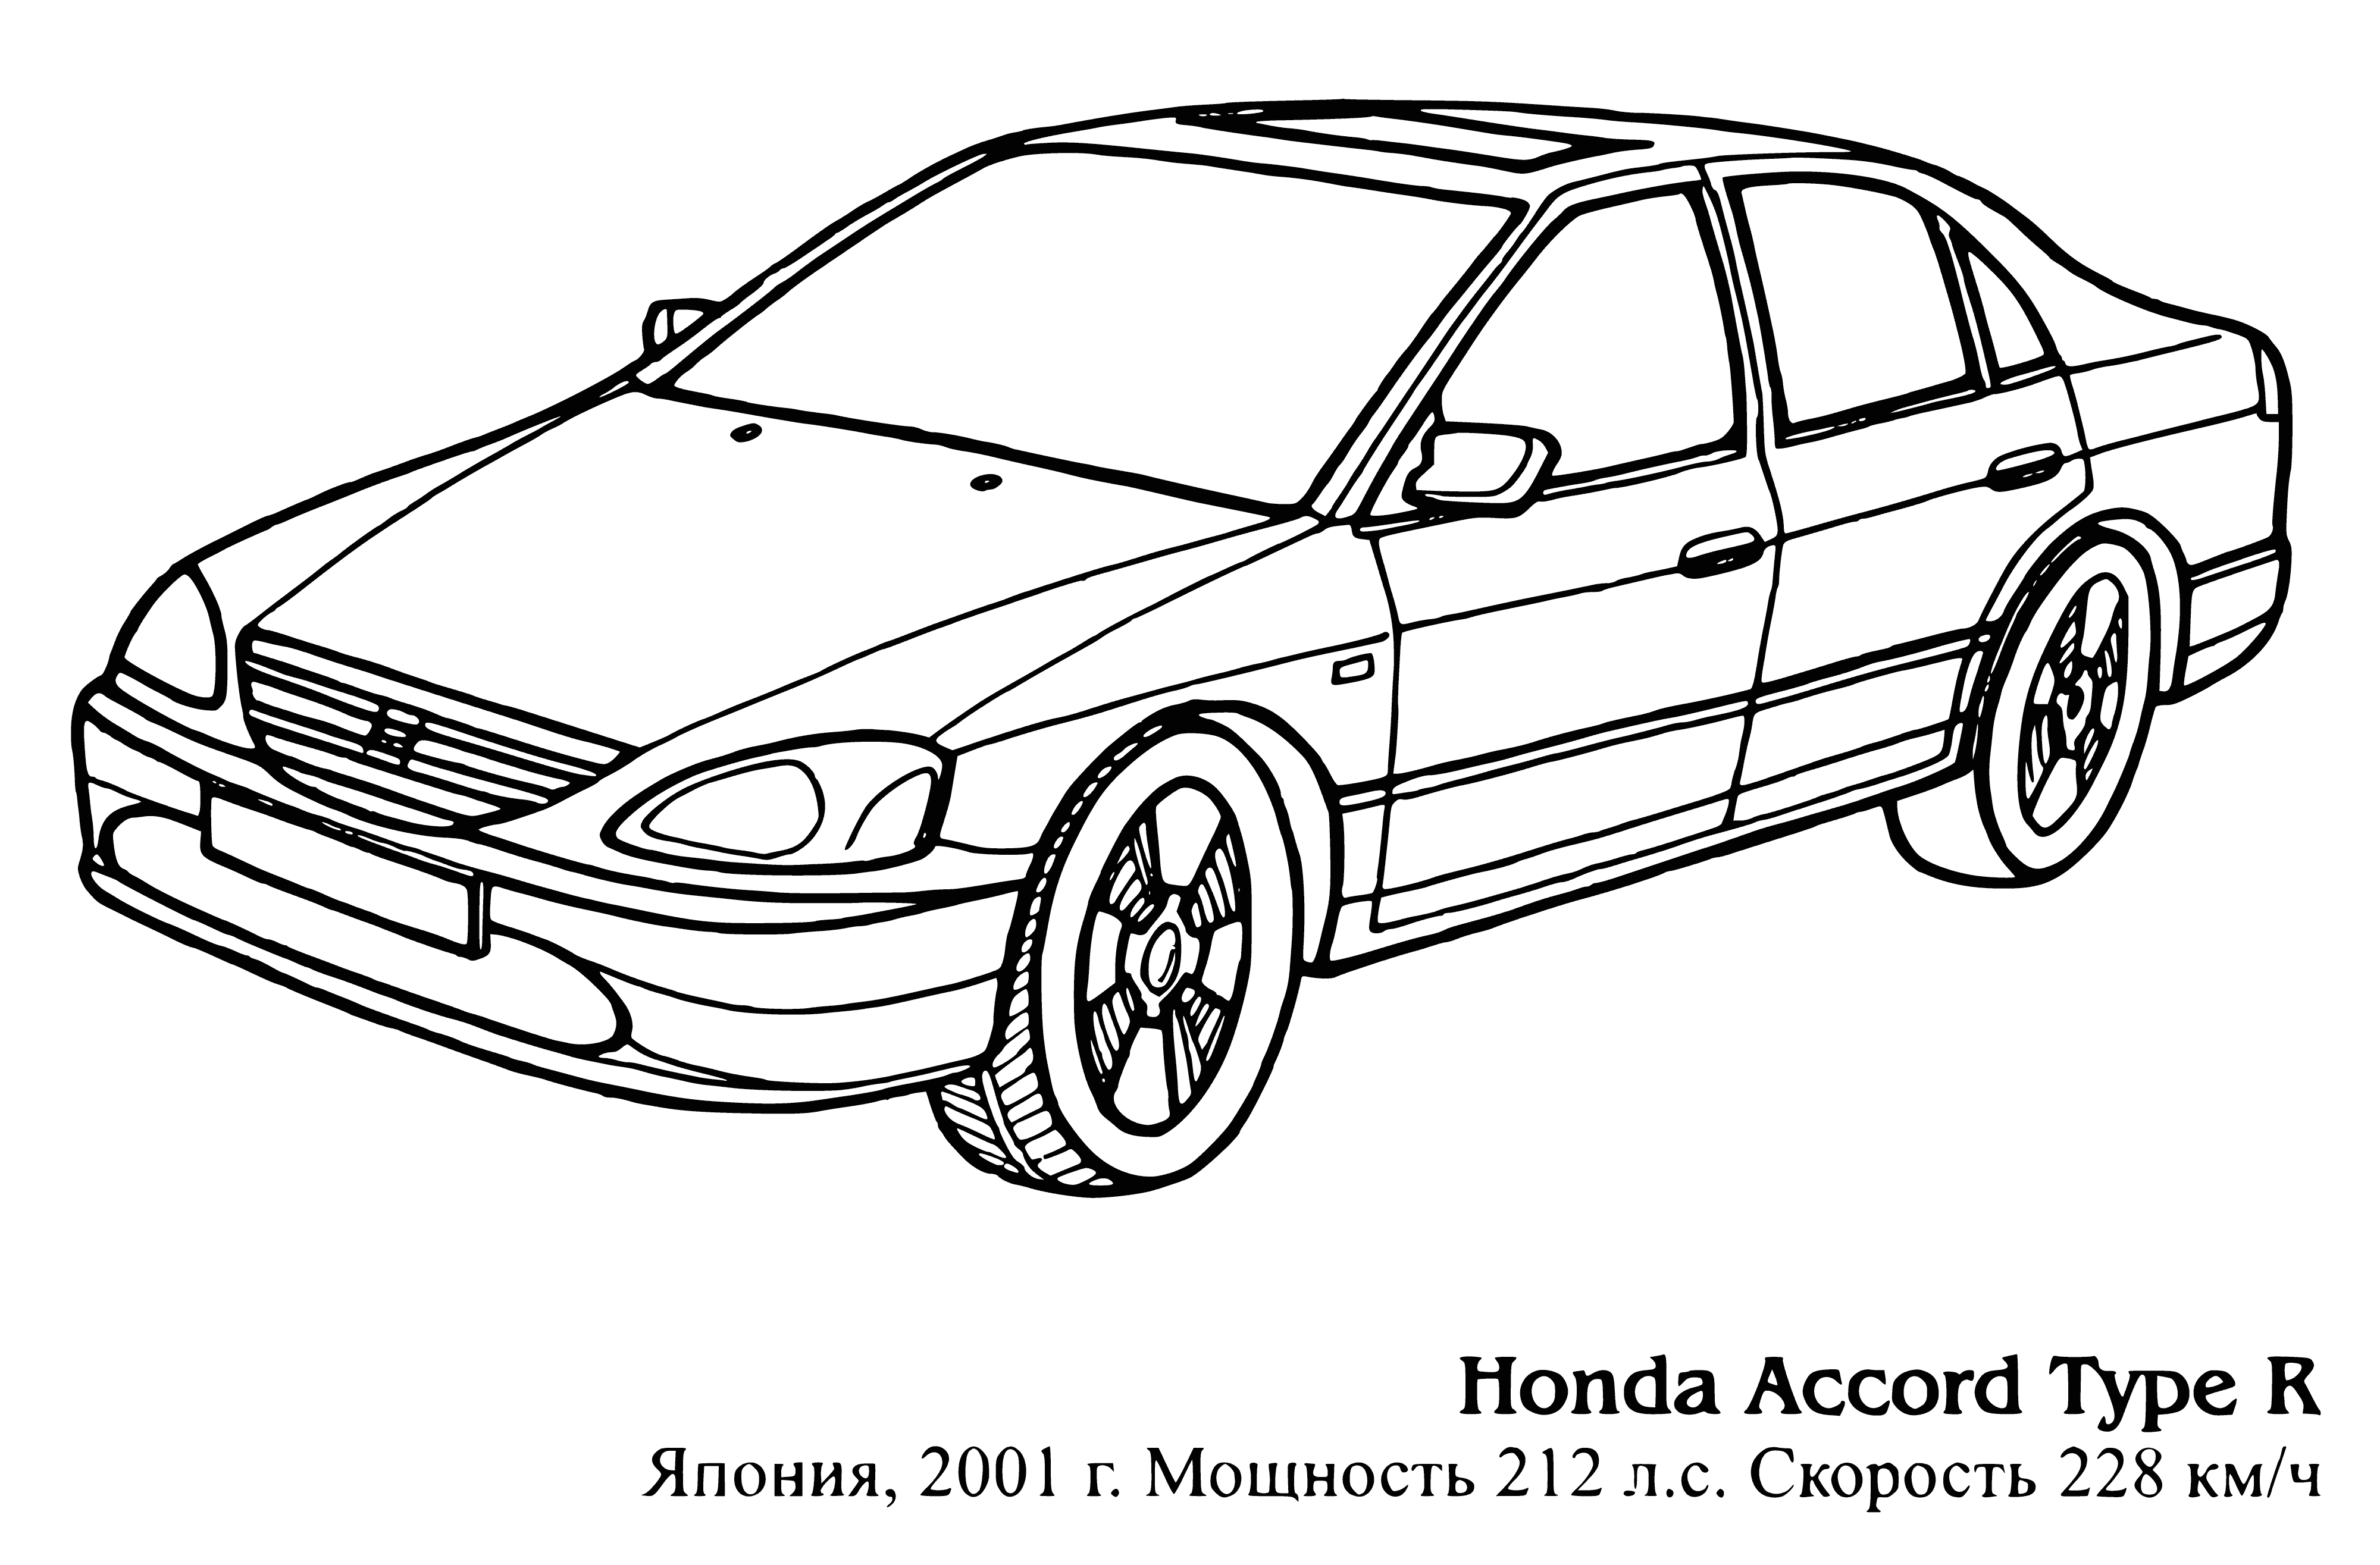 Honda Accord Type R coloring page